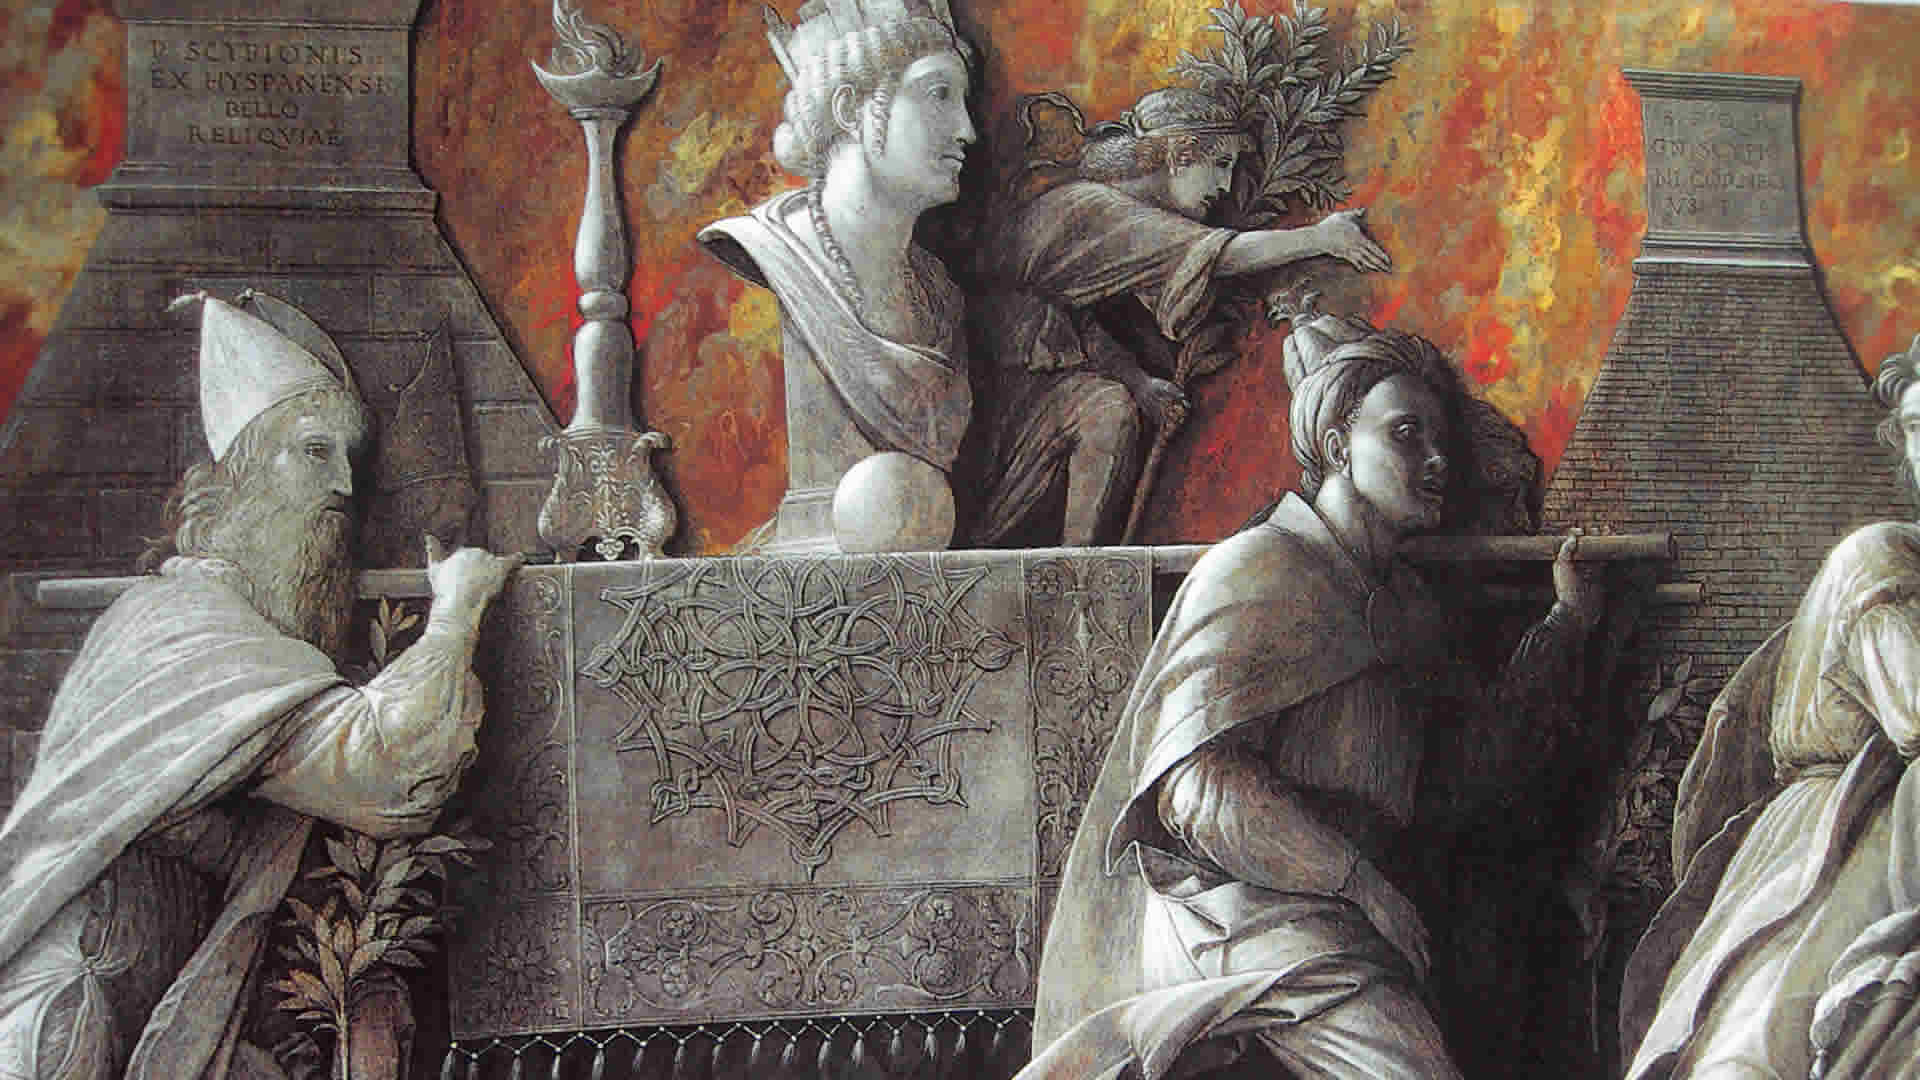 Andrea Mantegna Introduction of the Cult of Cybele at Rome 1505-6 - Detail